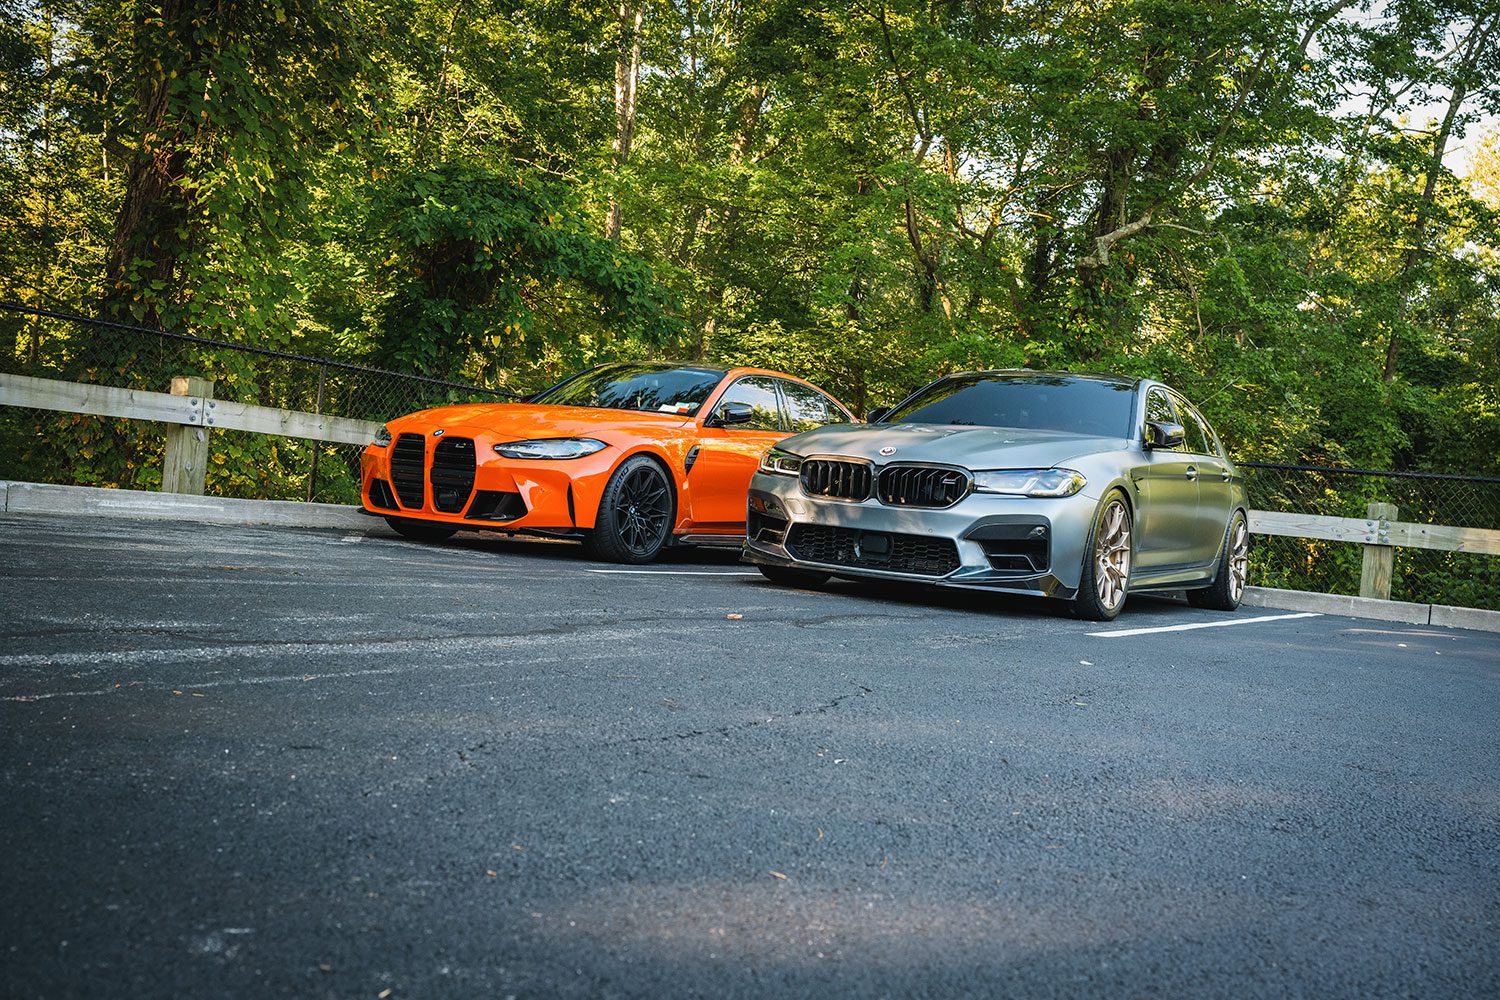 M3 and M5